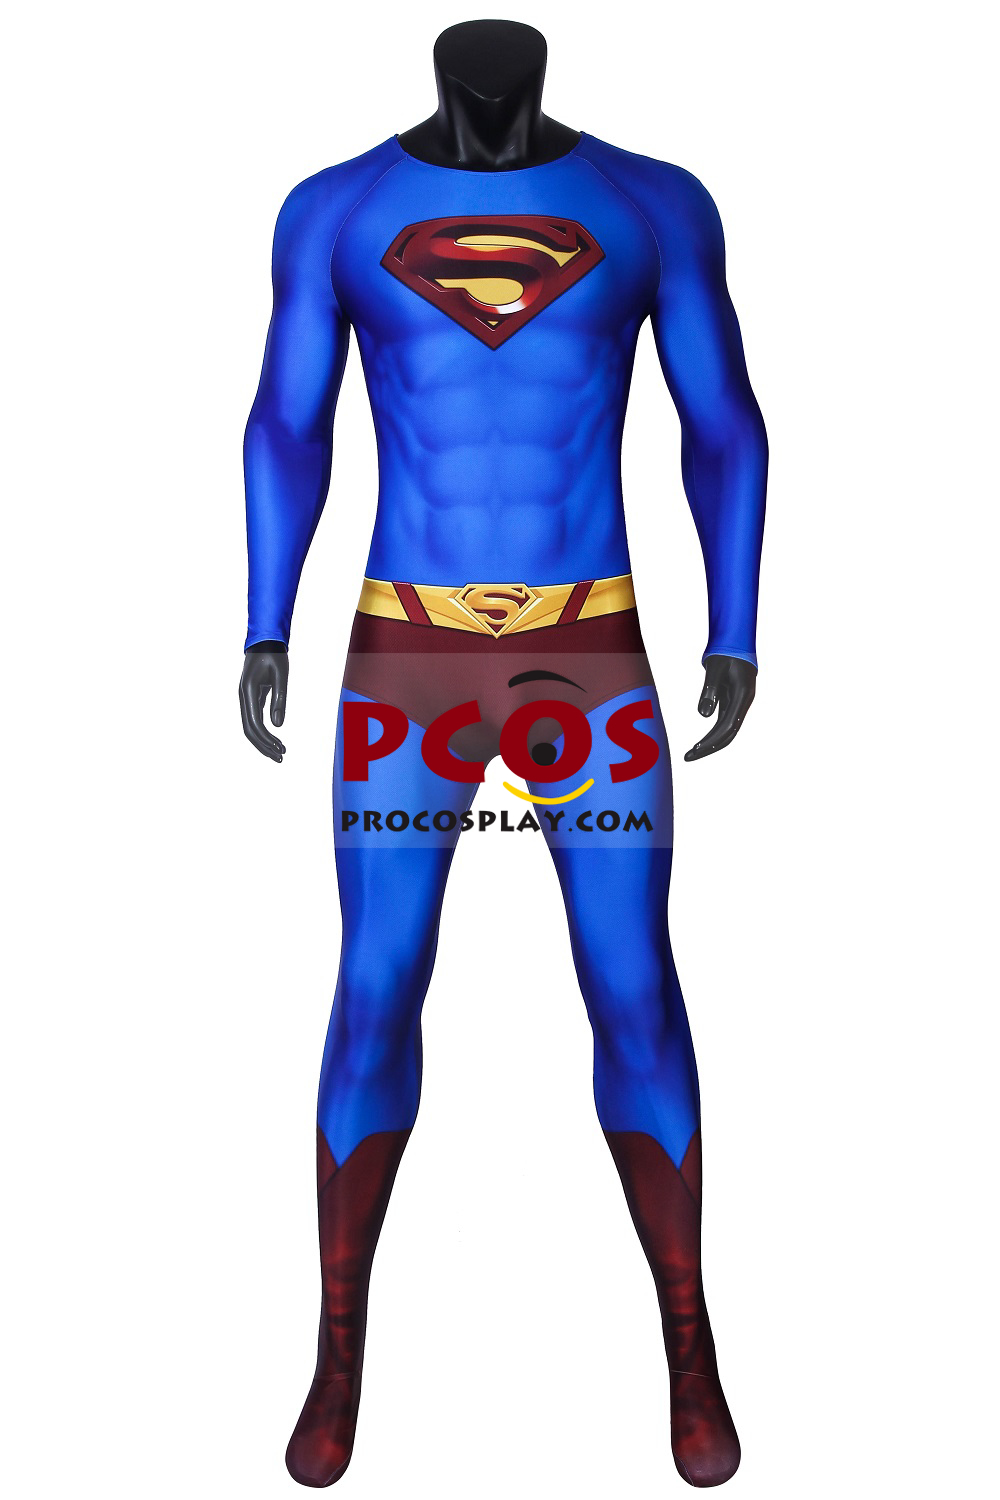 Clark Kent 3d Printed Tights For Sale At Procosplay Best Profession Cosplay Costumes Online Shop 2518